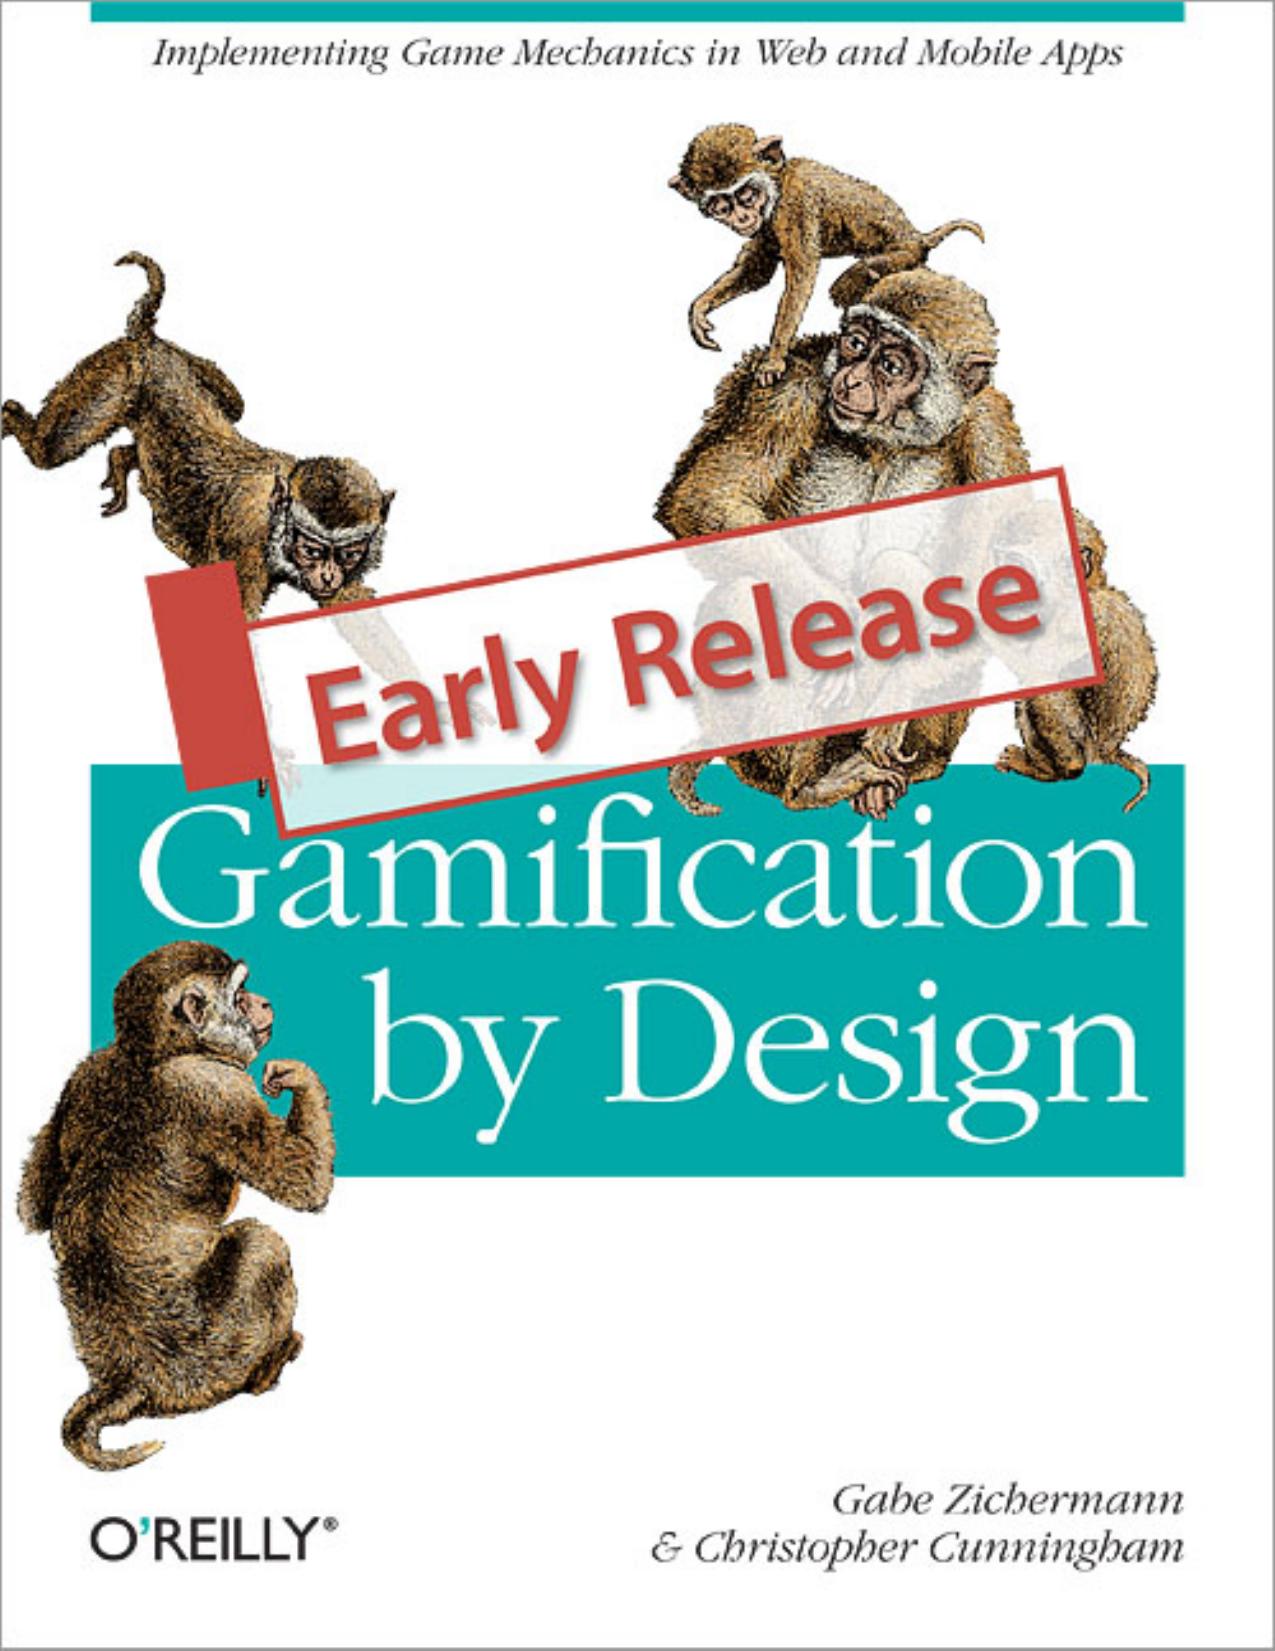 Gamification by design:Implementing Game Mechanics in Web and Mobile Apps by Gabe Zichermann